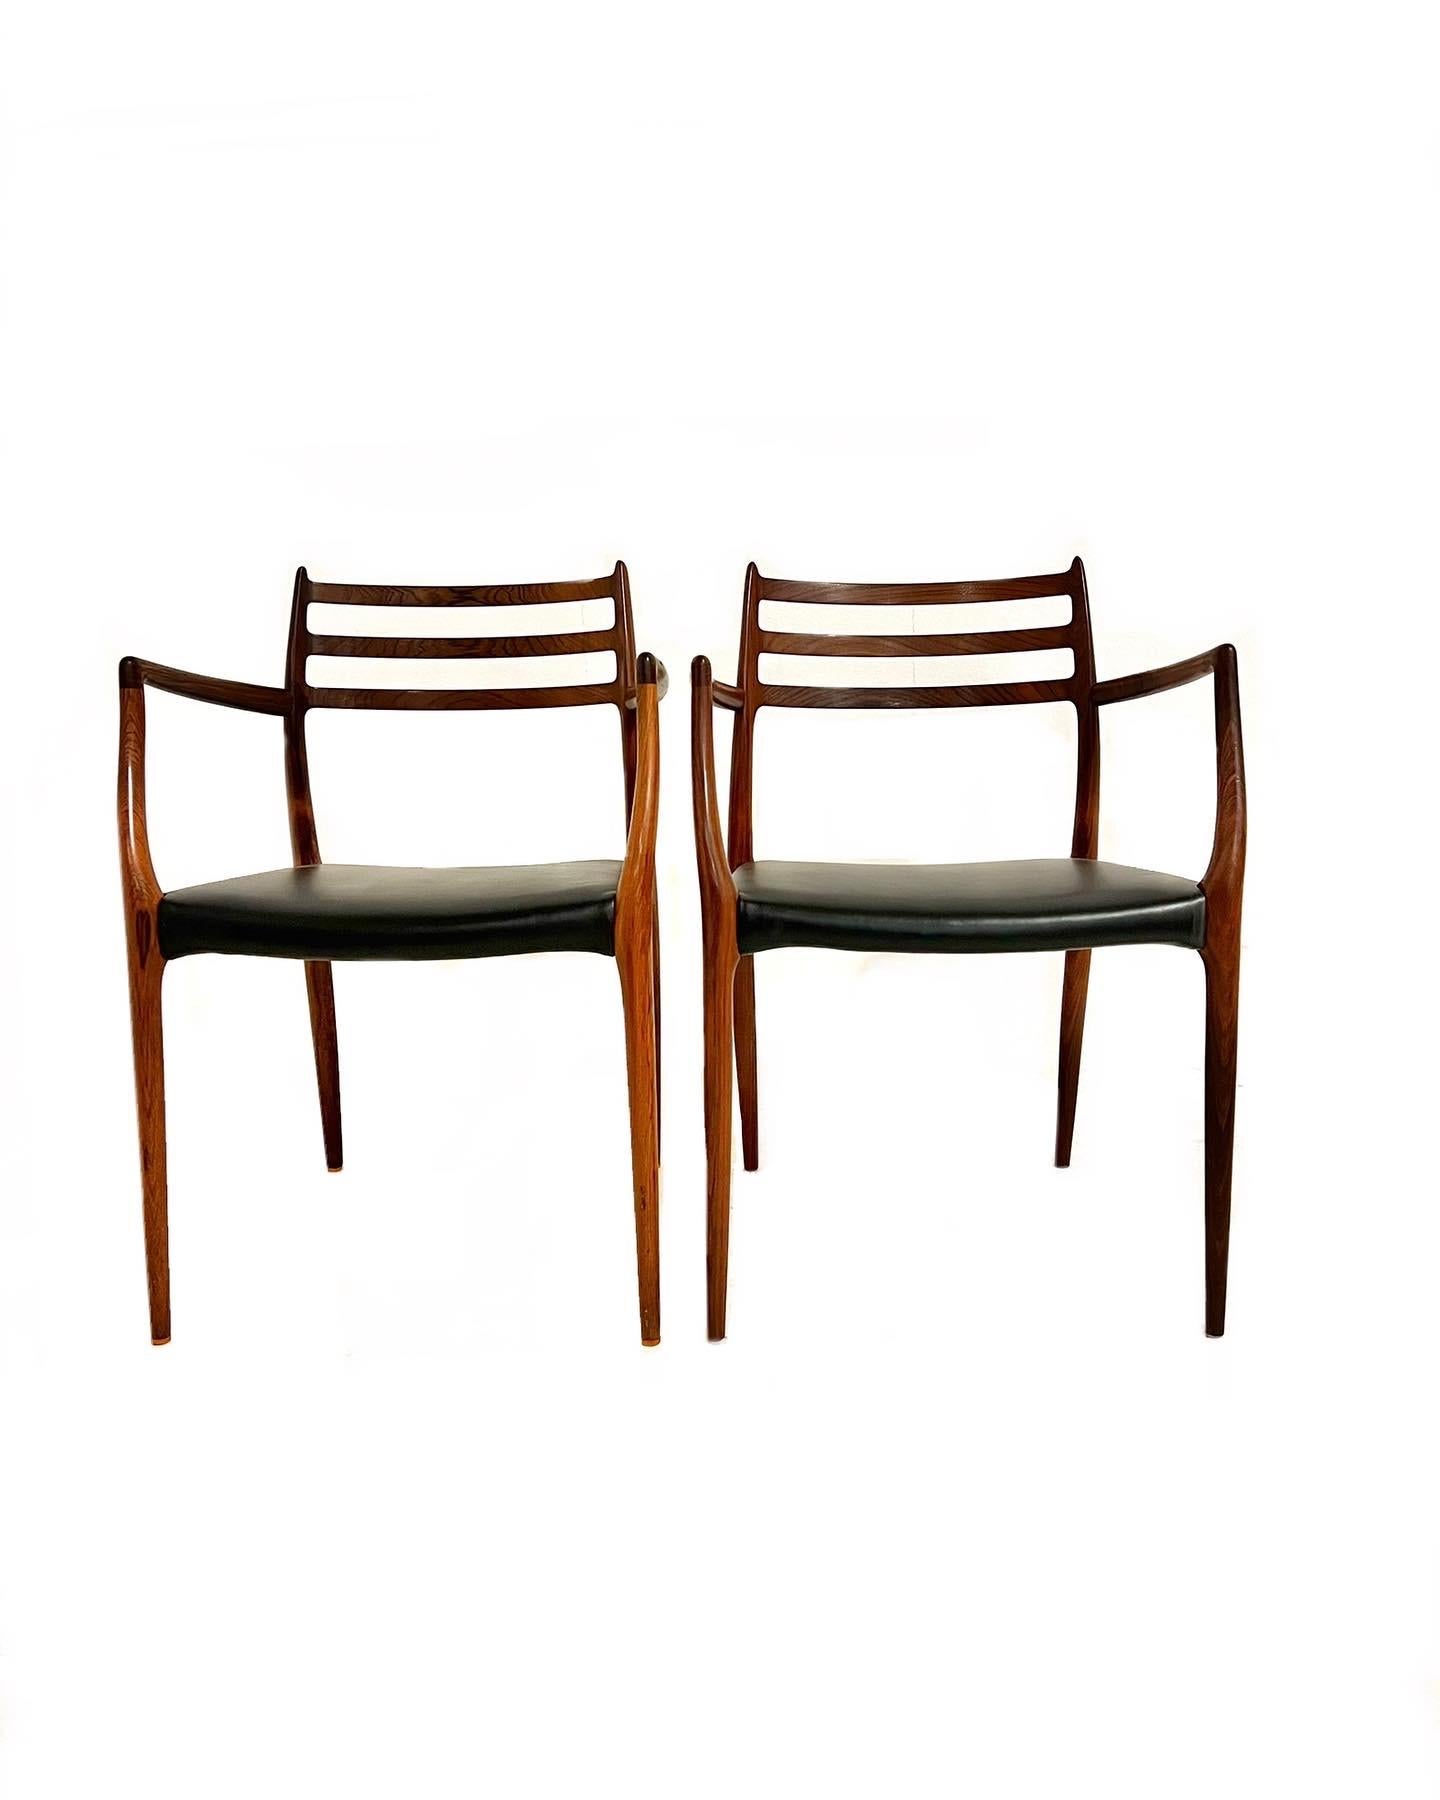 Niels Otto Møller, -pair of rosewood armchairs, model 62, for J. L. Møller, designed in 1962. These have been reupholstered with black aniline leather. A hard to find set of armchairs, and a chair where the organic lines and curves and the superply